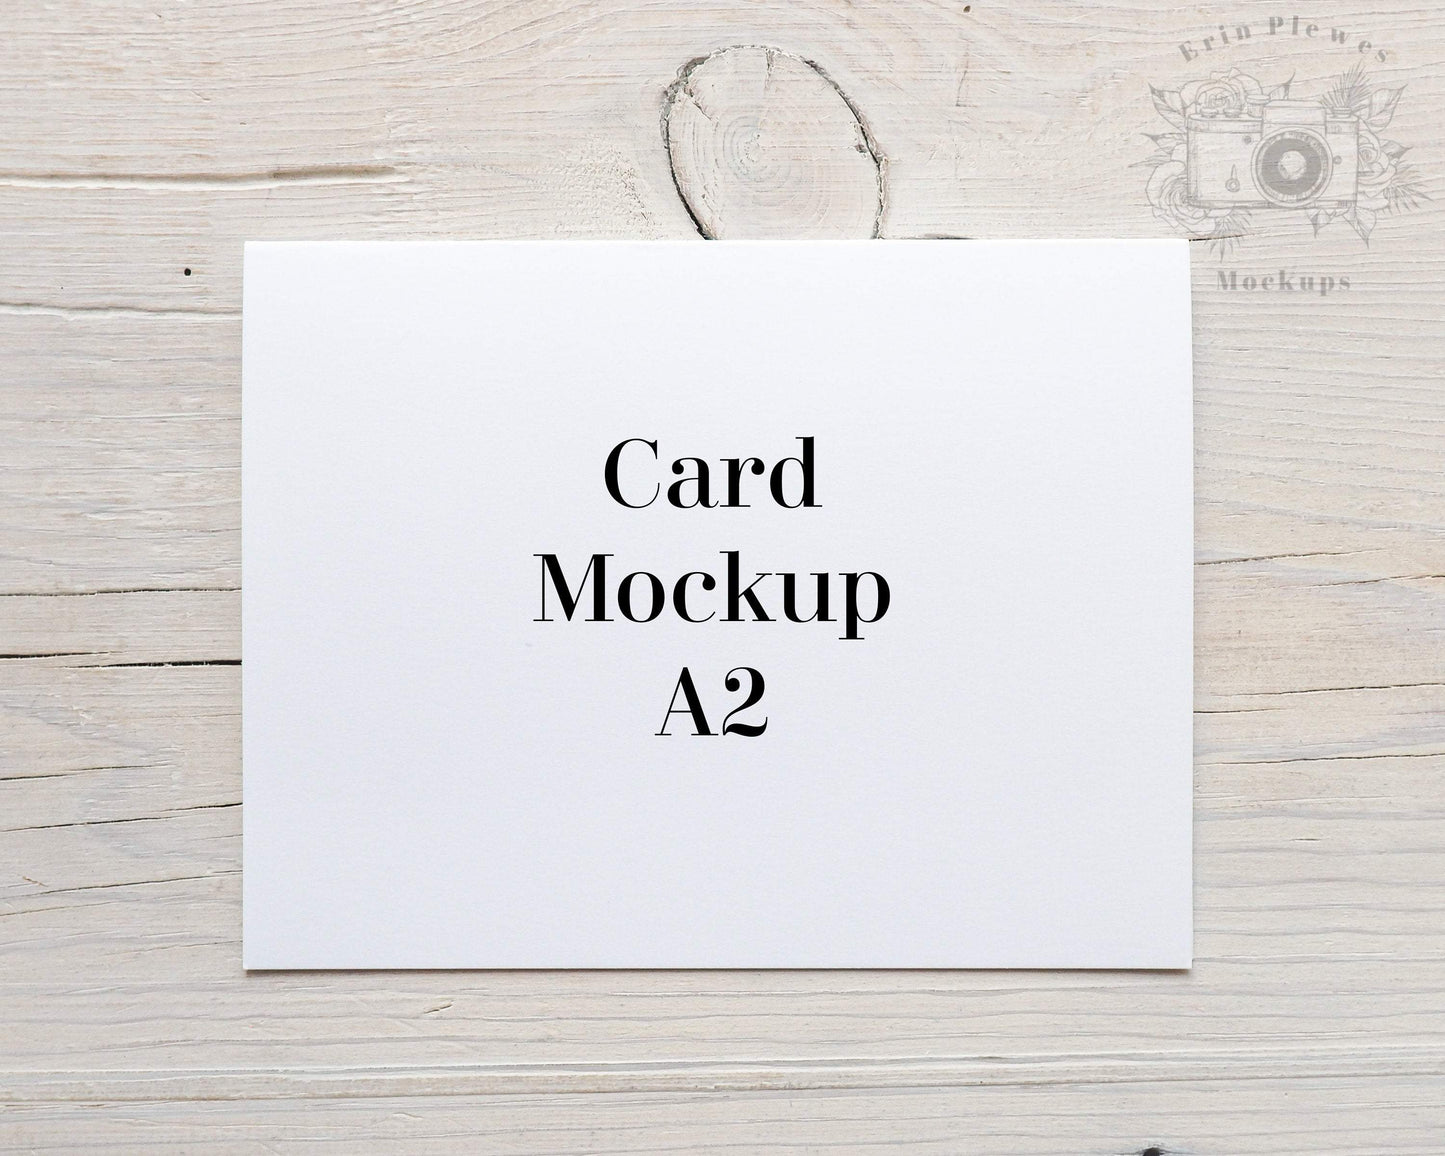 Erin Plewes Mockups Greeting Card Mockup A2, Invitation mock-up for rustic wedding and thank you notes, Landscape card mock up A-2